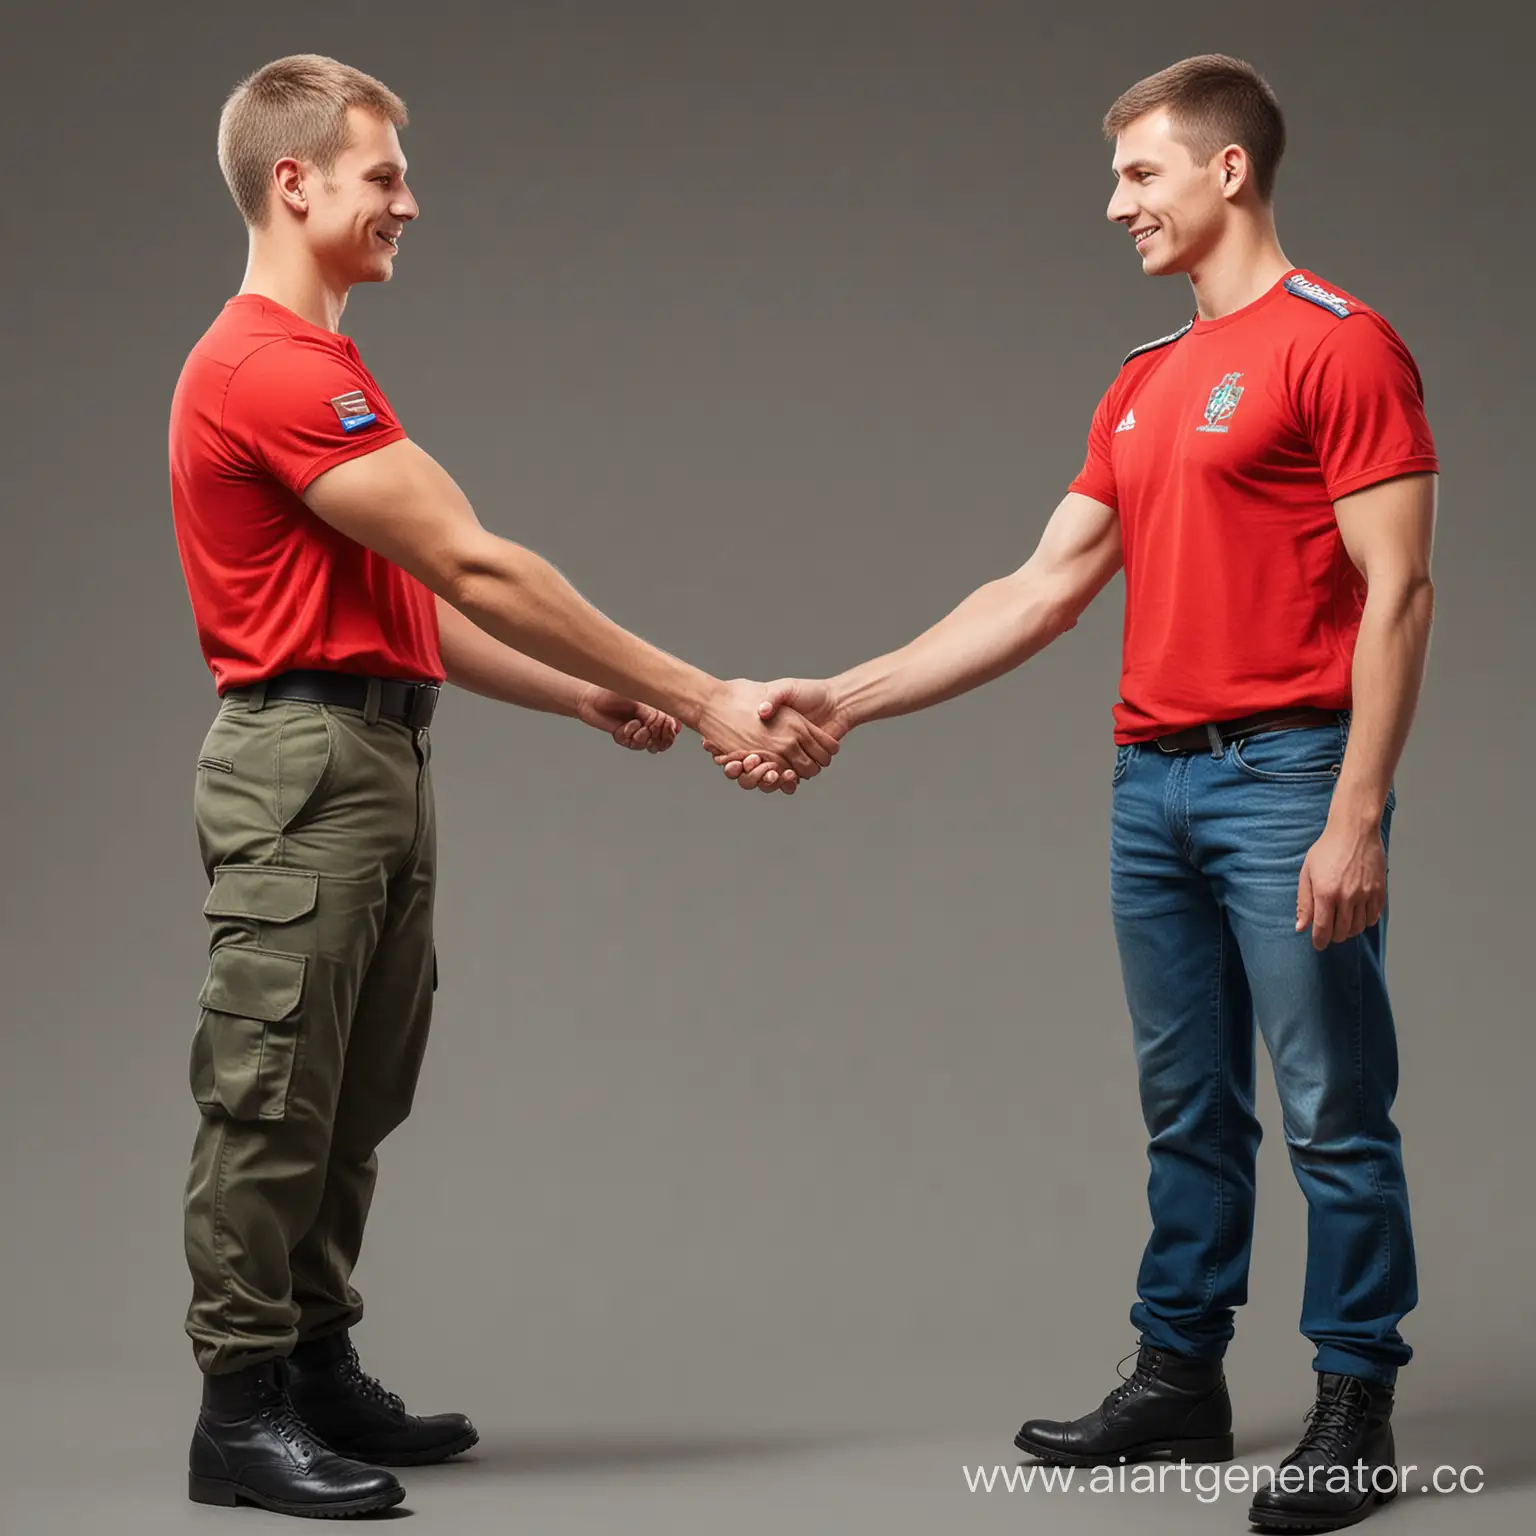 Russian-Army-Soldier-Shaking-Hands-with-Civilian-in-Red-TShirt